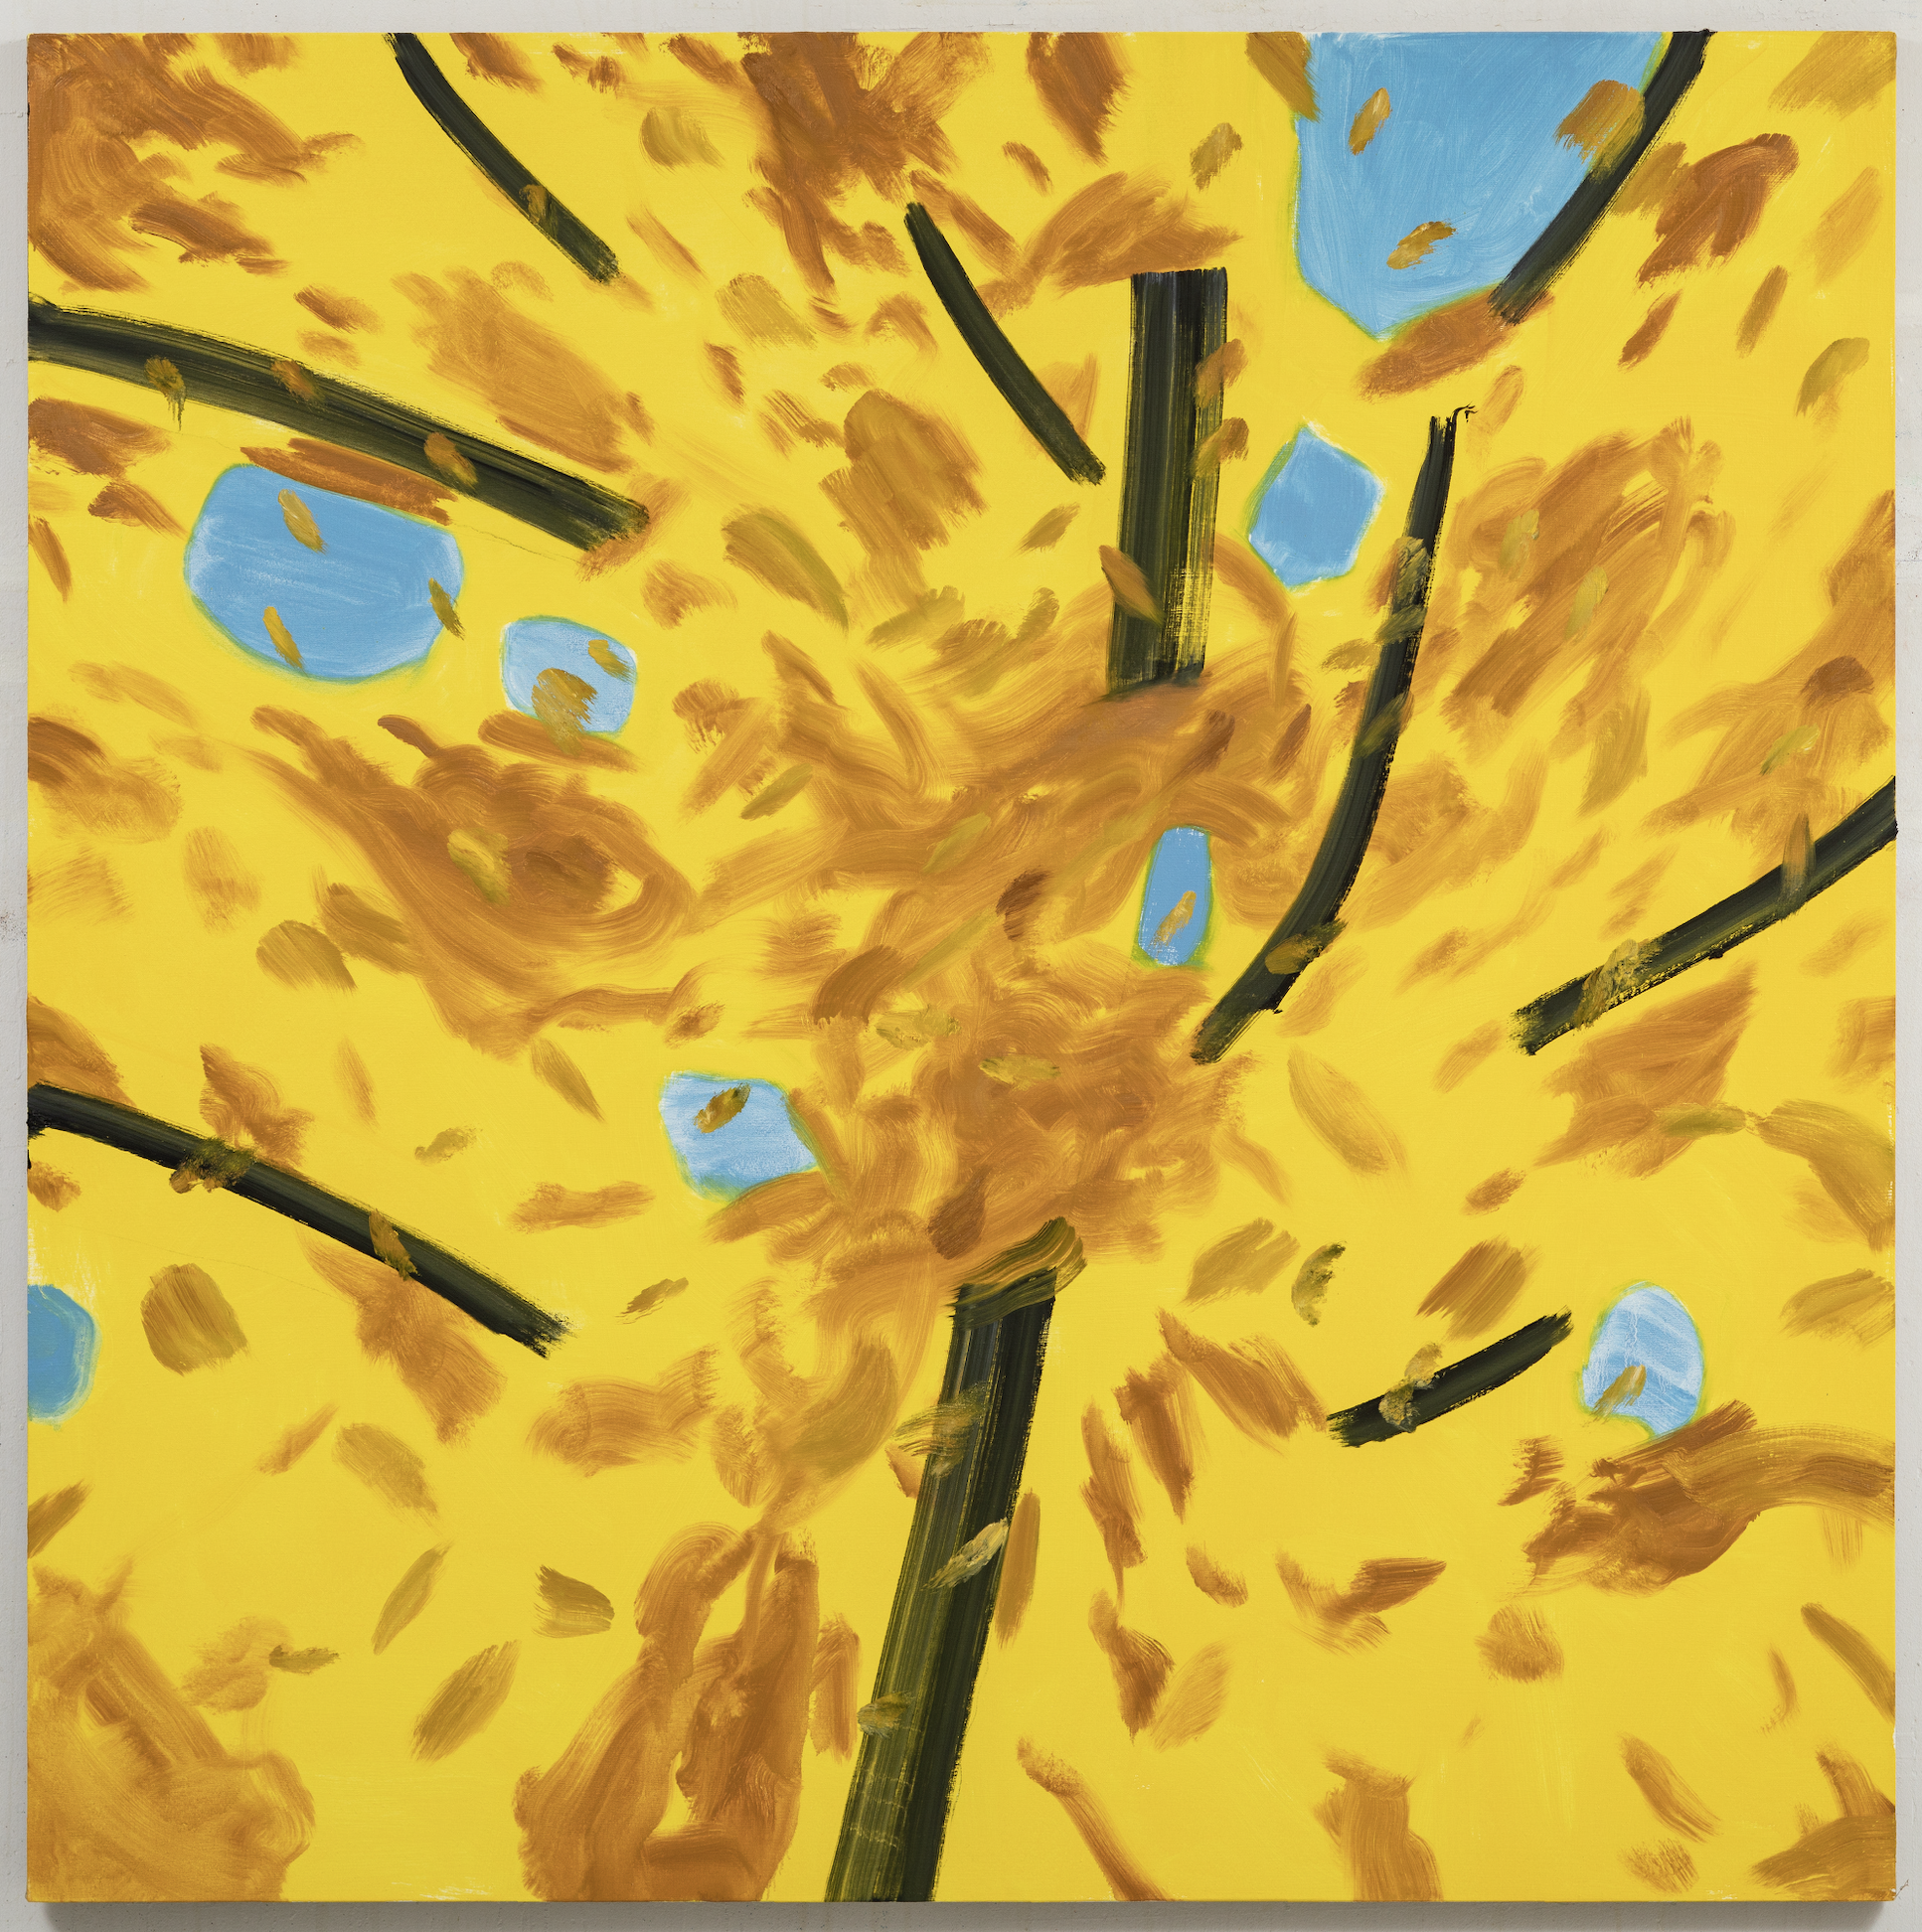 Alex Katz, ‘Yellow Tree 1,’ 2020. Oil on linen, 72 by 72in. (182.9 by 182.9cm). Private Collection, Republic of Korea. © 2022 Alex Katz/Artists Rights Society (ARS), New York. Photo: Courtesy of the artist and Gladstone Gallery